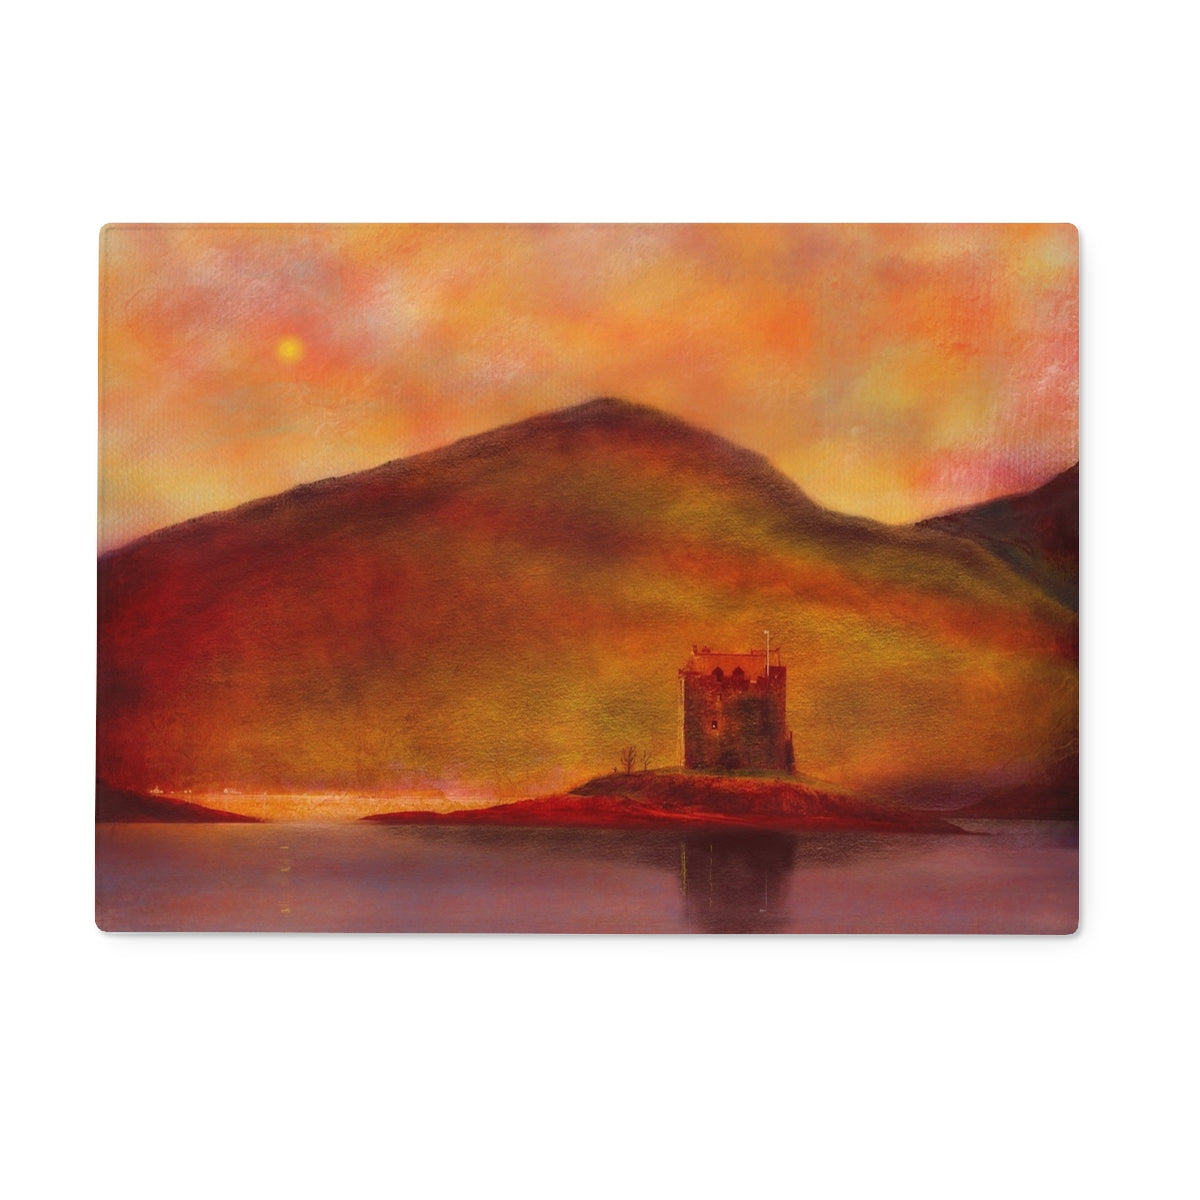 Castle Stalker Sunset Art Gifts Glass Chopping Board-Glass Chopping Boards-Historic & Iconic Scotland Art Gallery-15"x11" Rectangular-Paintings, Prints, Homeware, Art Gifts From Scotland By Scottish Artist Kevin Hunter